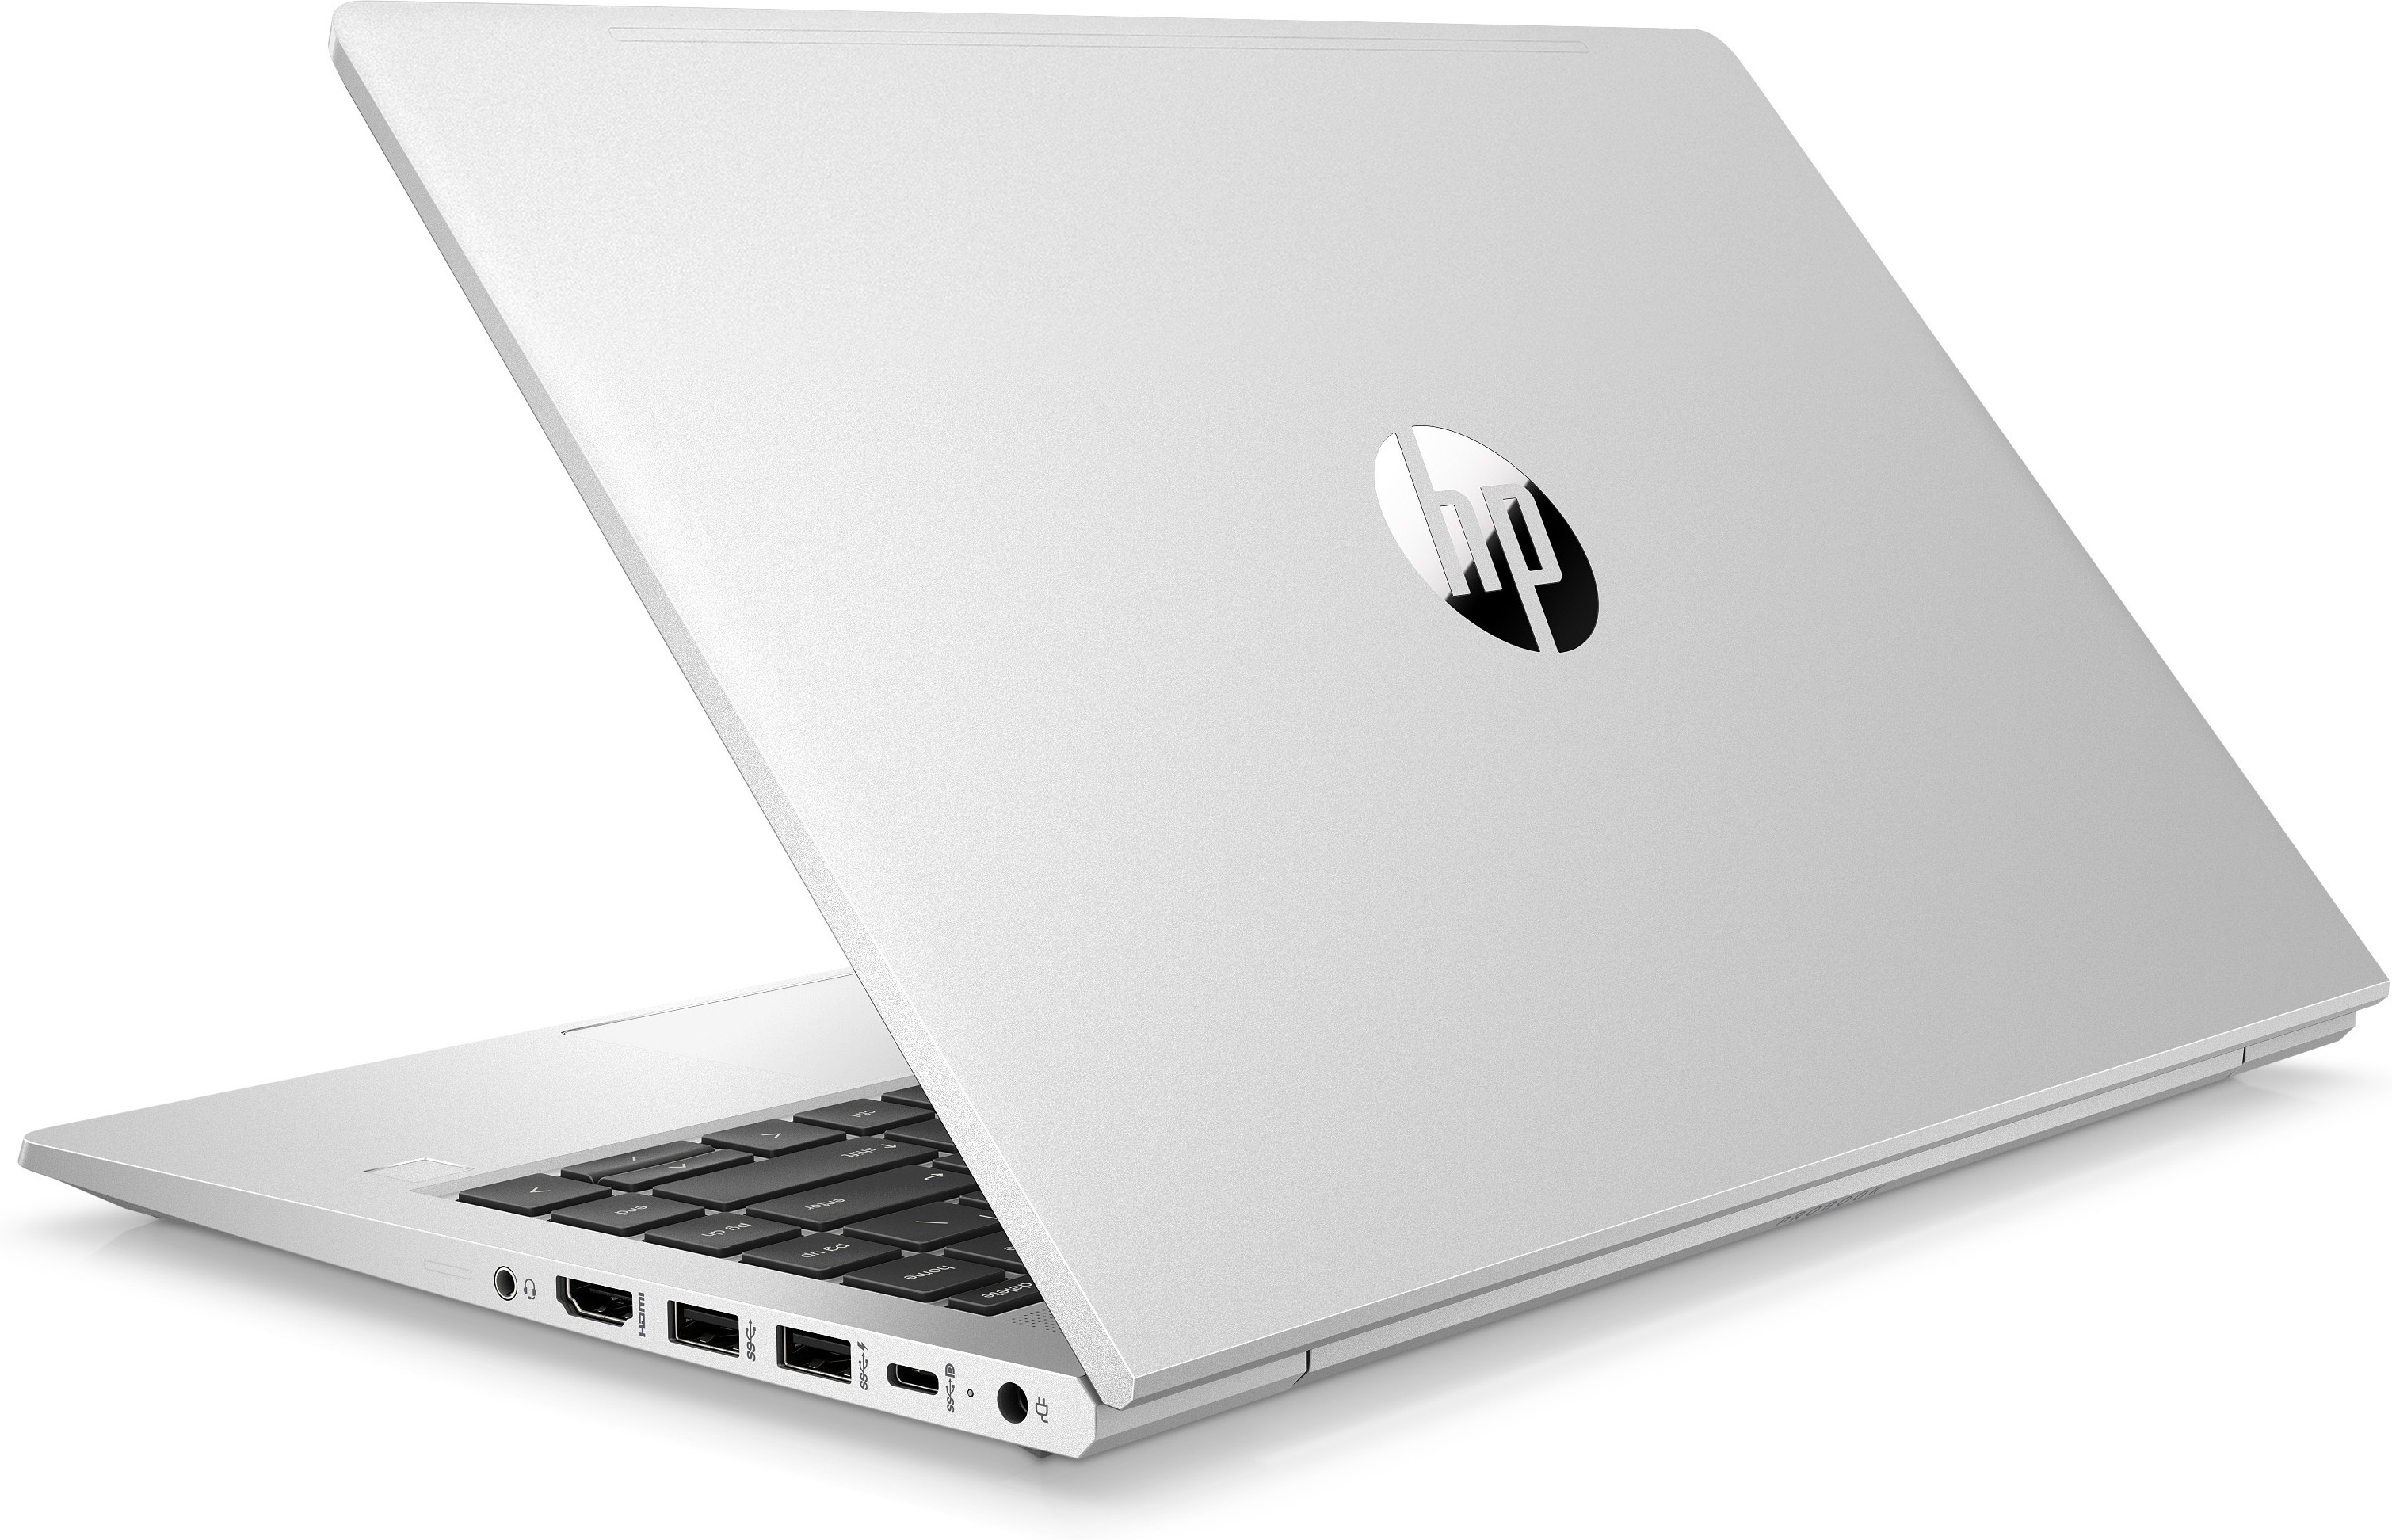 HP PB440G9 i5-1235U 14 8GB/256 PC Inteli5-1235U- 14.0 FHD AG LED UWVA- UMA- 8GB DDR4- 256GB SSD- ax6G+BT- 3C Batt- FPR- W11 Pro64 DG106- 1yr Wrty- Netherlands QWERTY